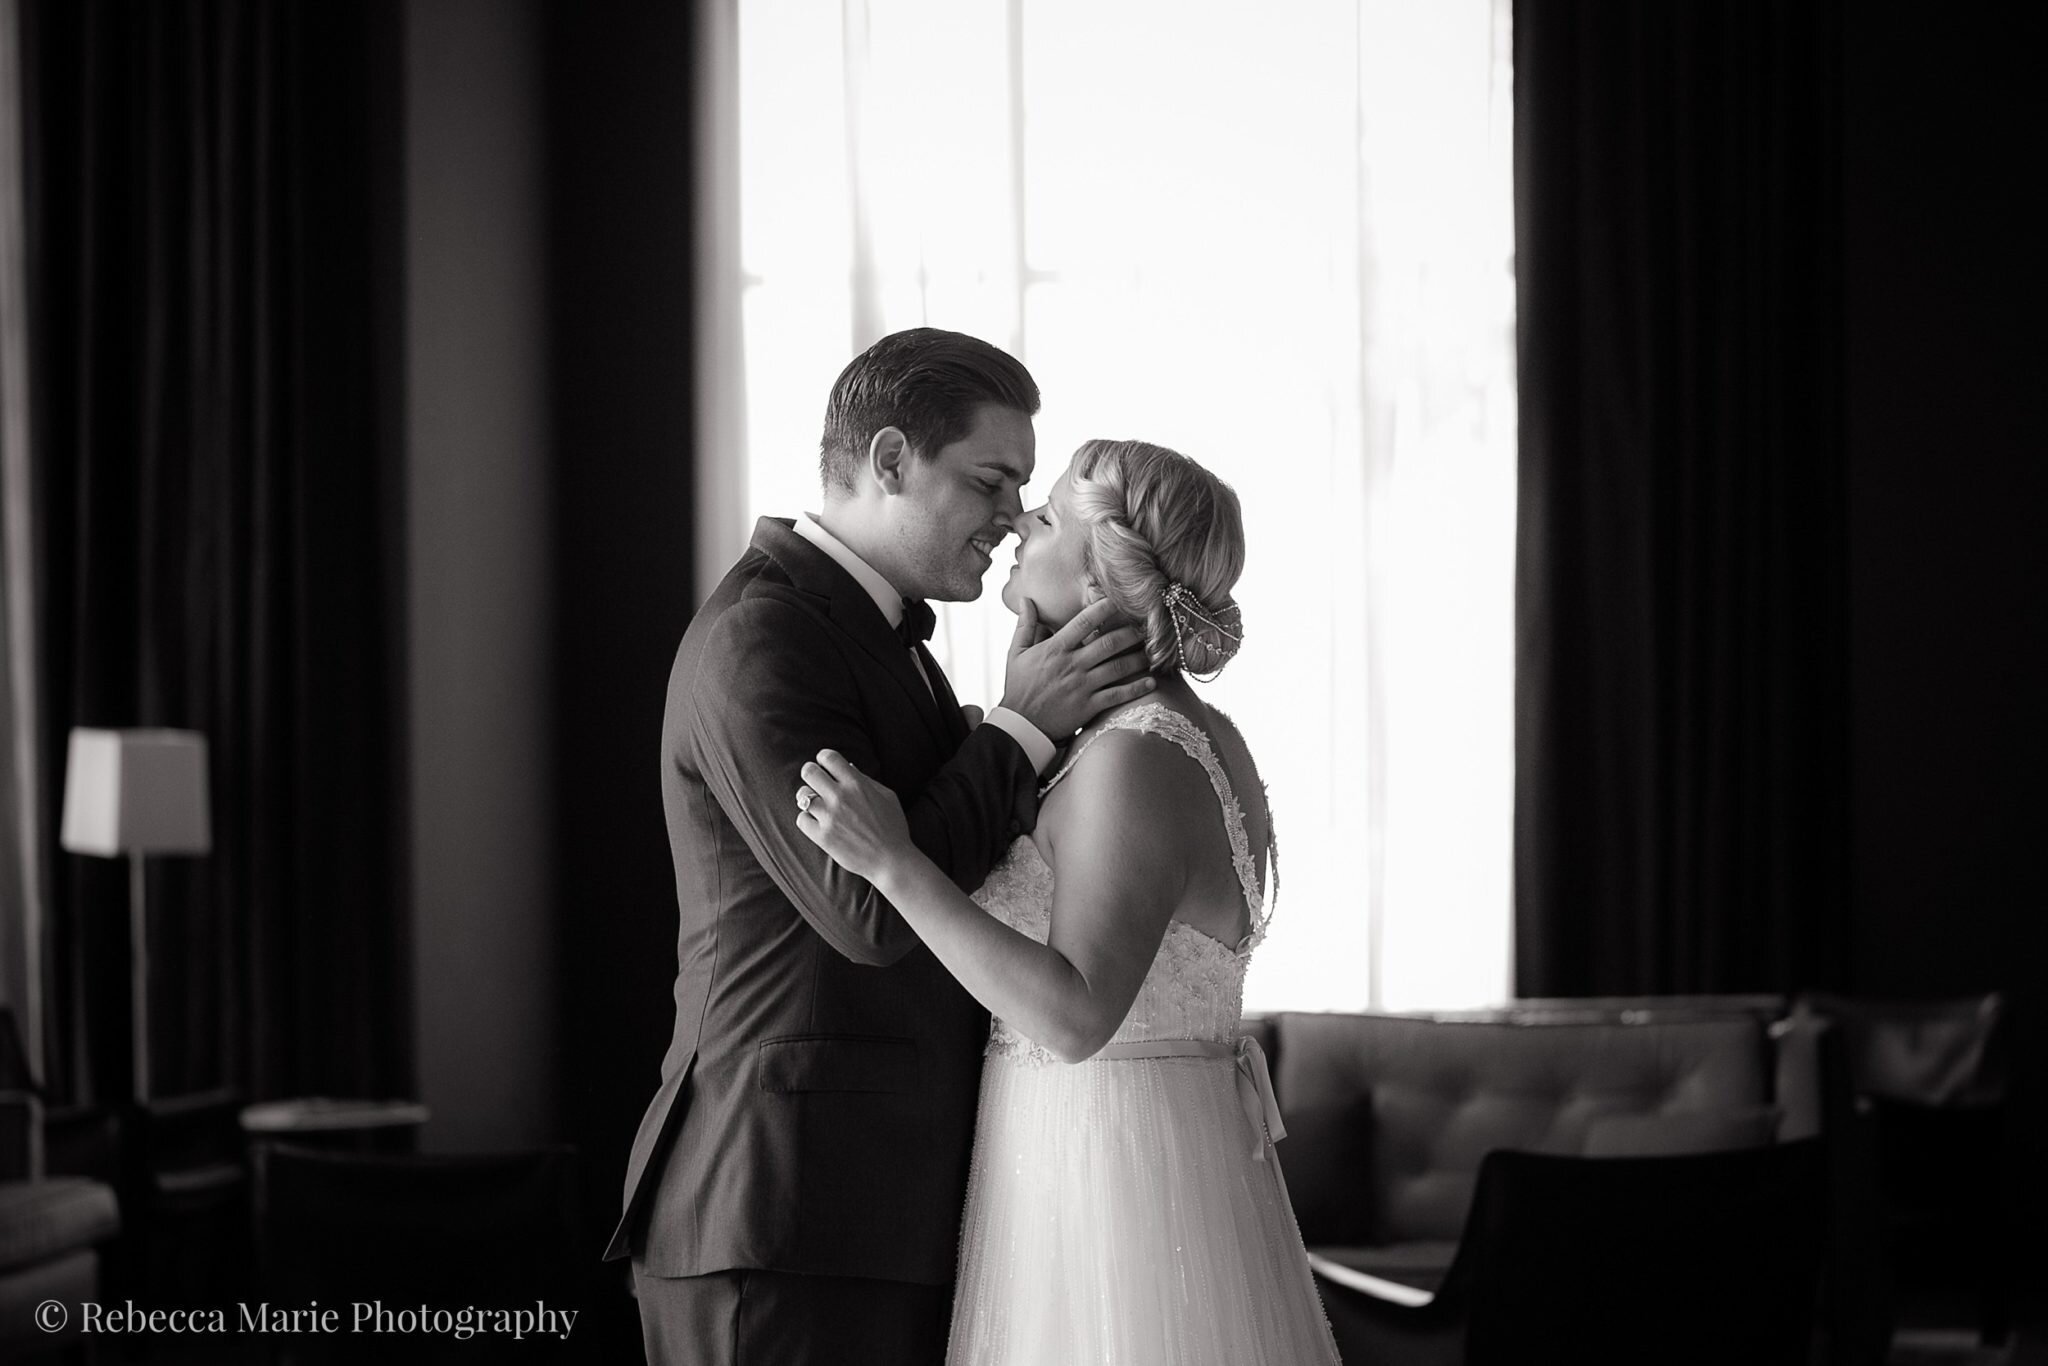 Tips-for-Gorgeous-Wedding-Day-Photos-Rebecca-Marie-Photography20140802-0036